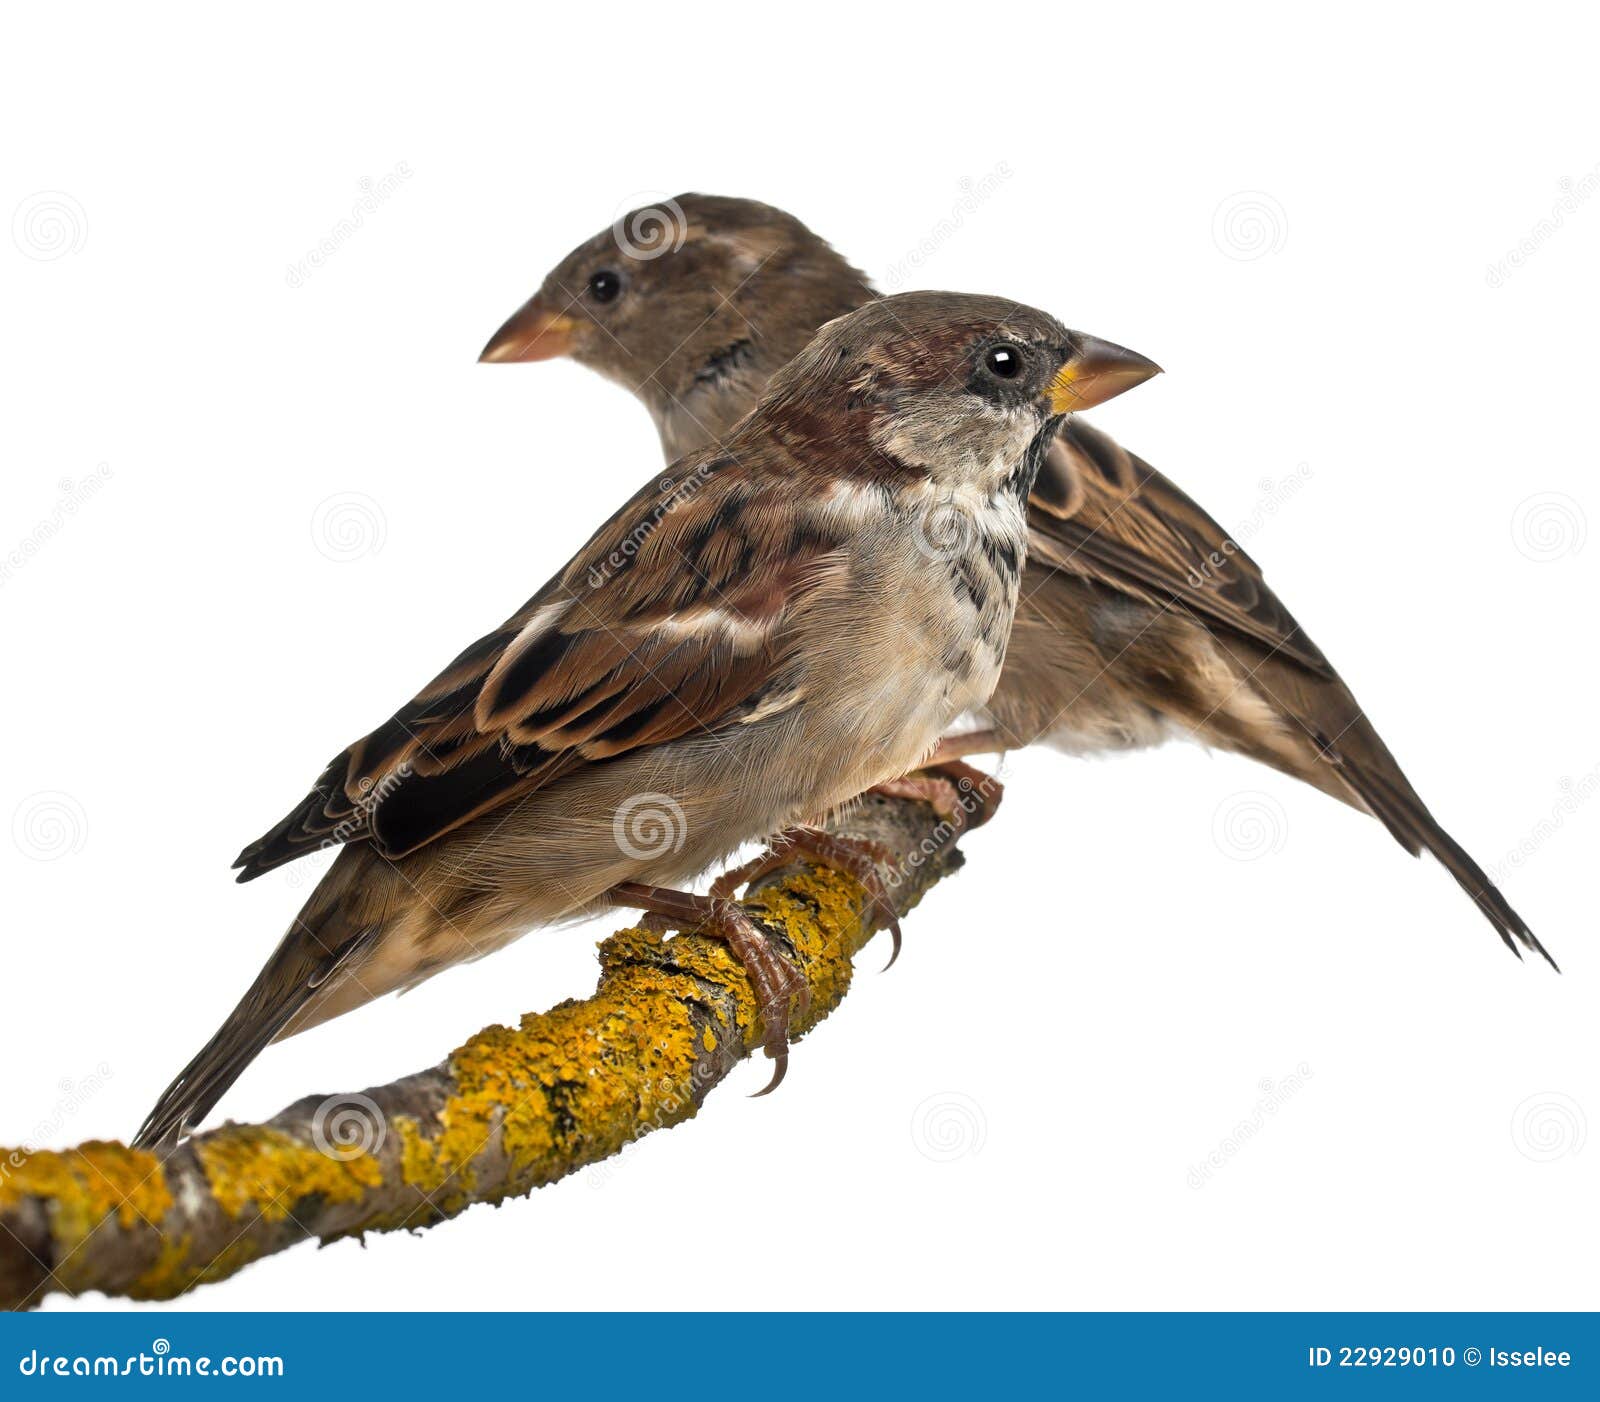 male and female house sparrows, passer